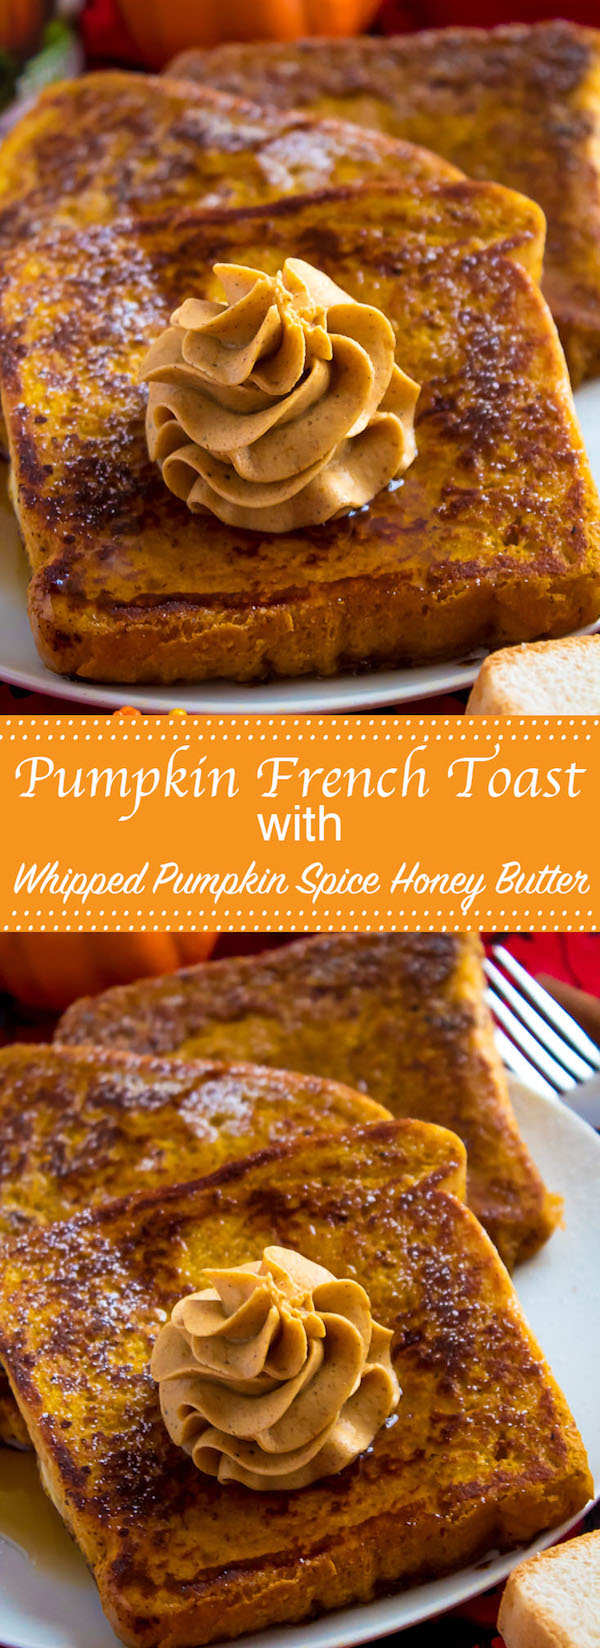 Enjoy thick slices of Pumpkin French Toast perfect for fall mornings. Serve with a dust of powdered sugar, a drizzle of pure maple syrup and a dollop of Whipped Pumpkin Spice Honey Butter!